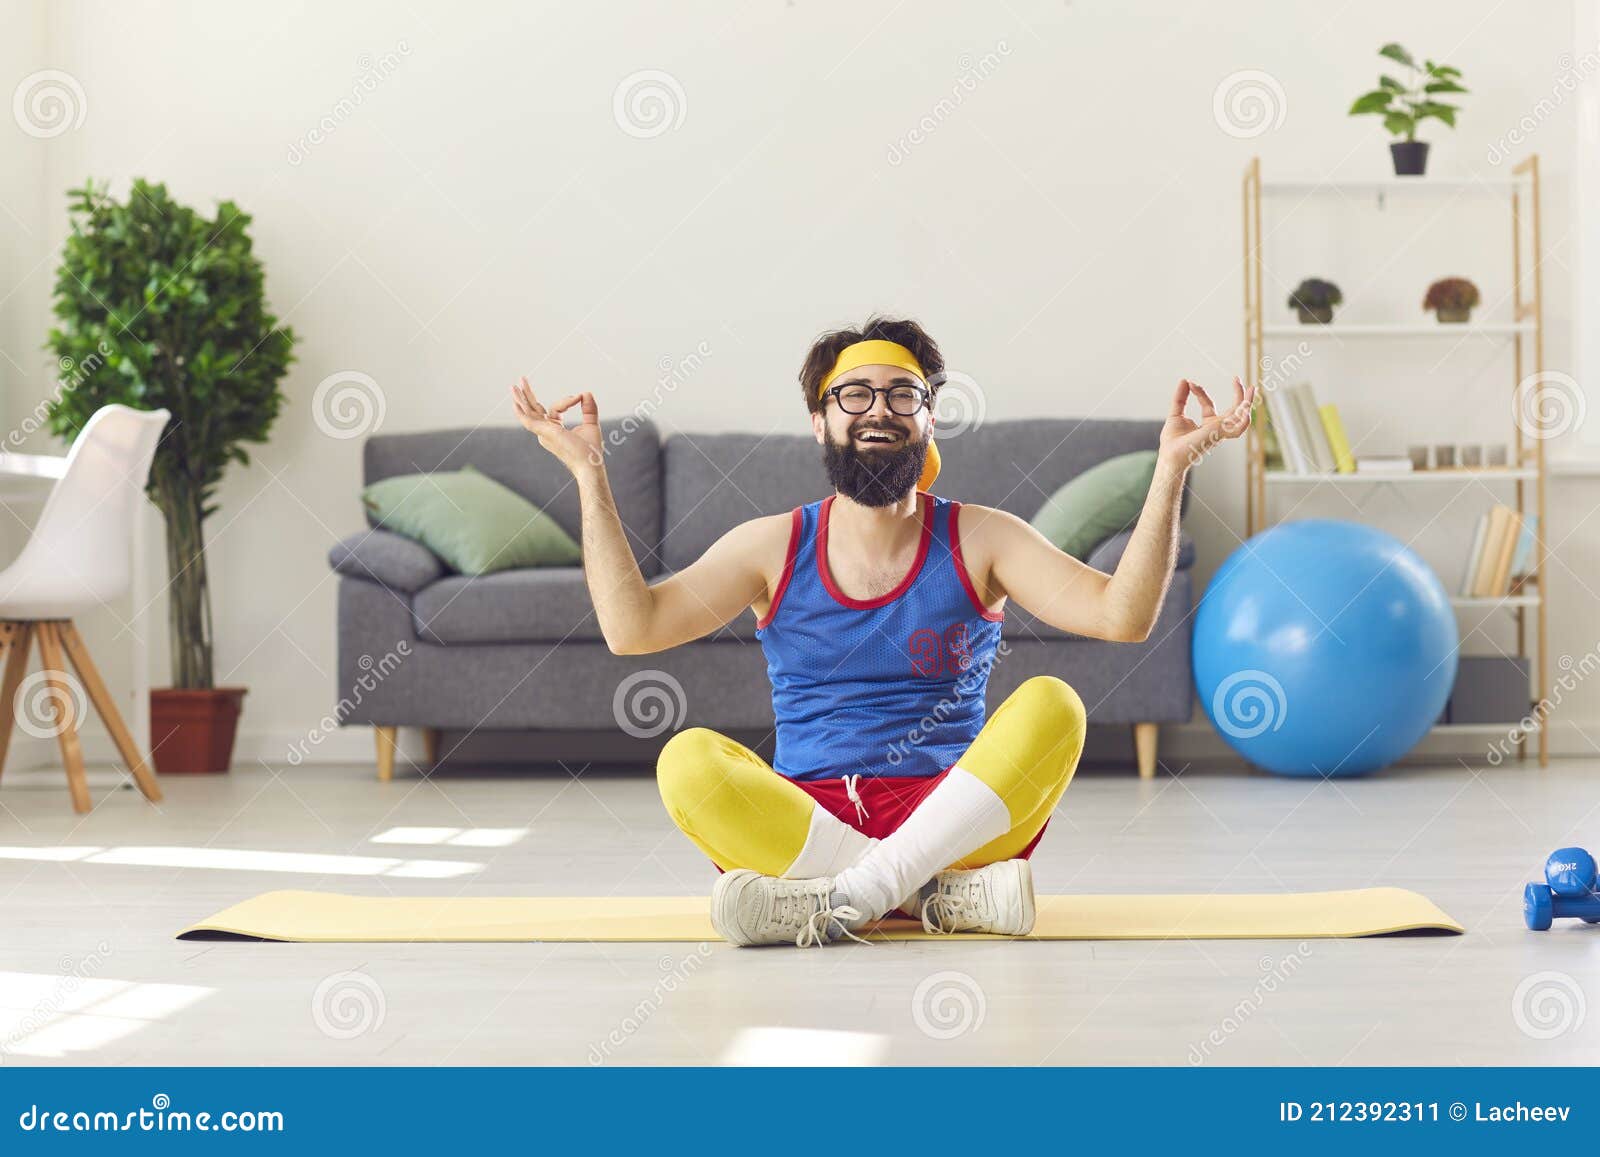 Funny Happy Man in Retro Sportswear Sitting in Easy Yoga Pose and Learning  To Meditate Stock Image - Image of practice, health: 212392311